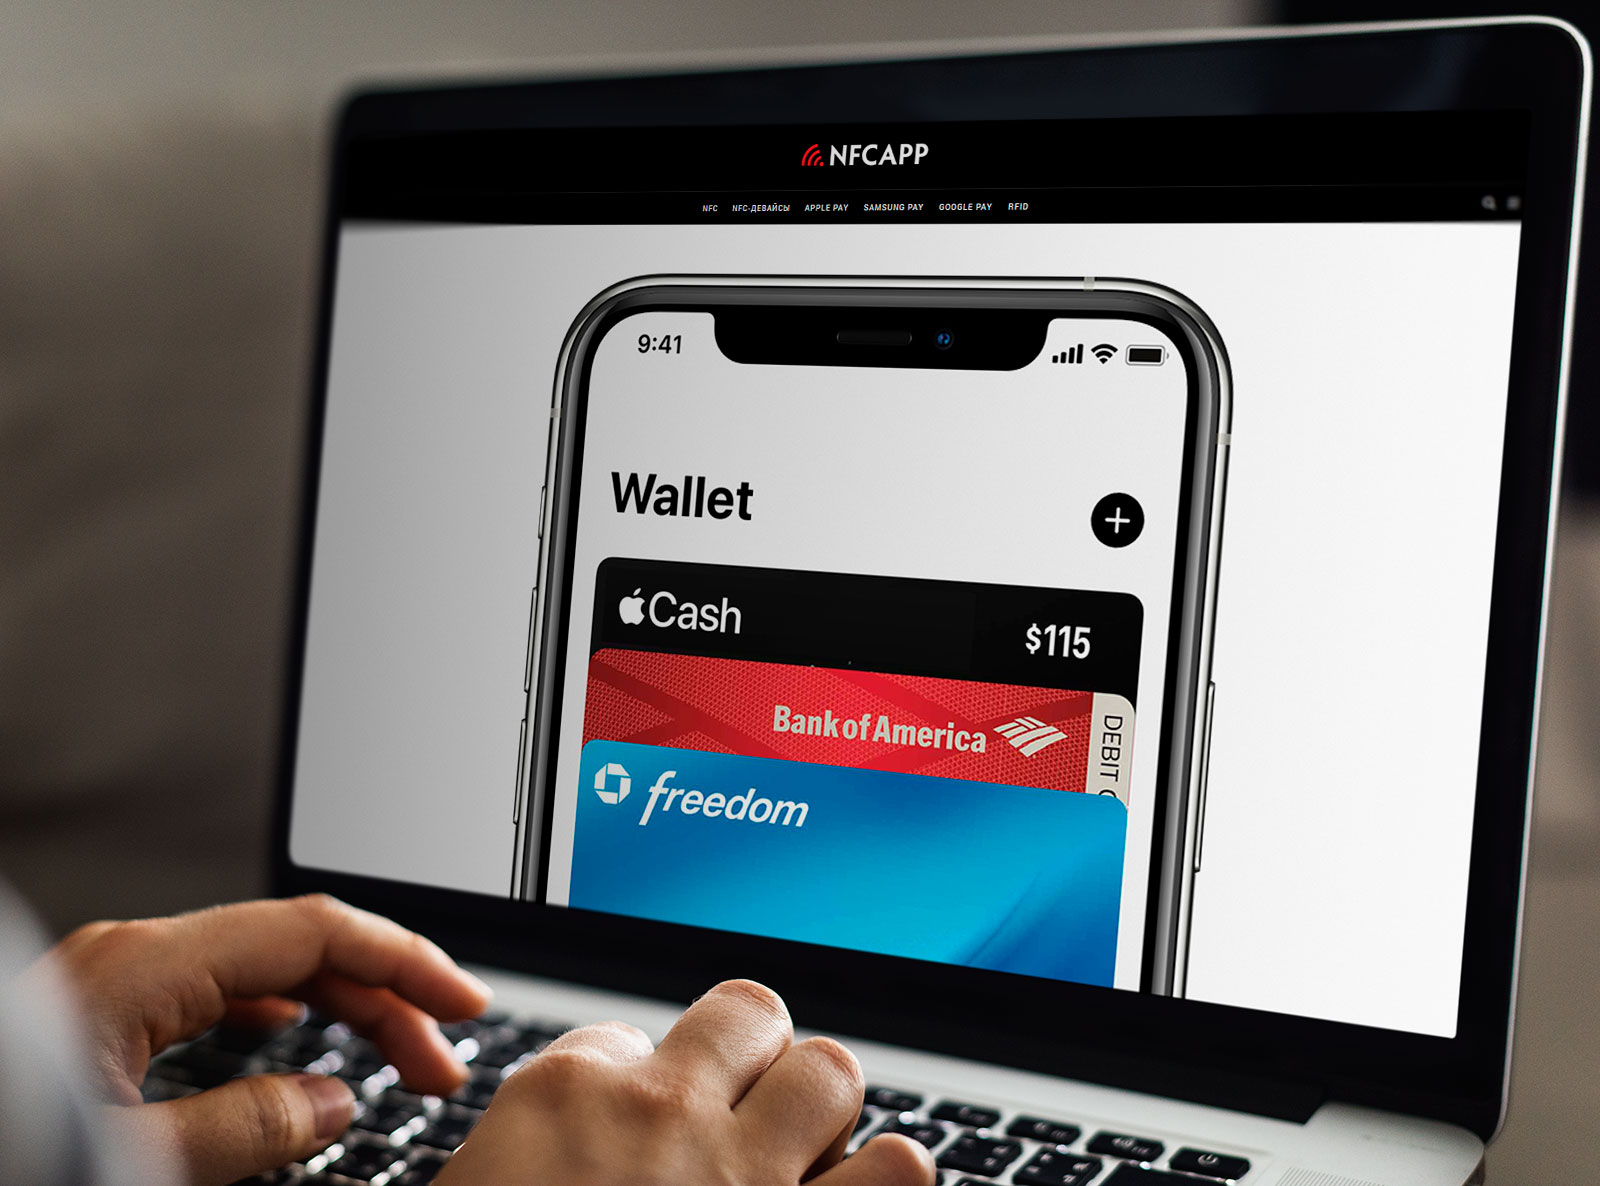 How Do I Create A Membership Card For Apple Wallet